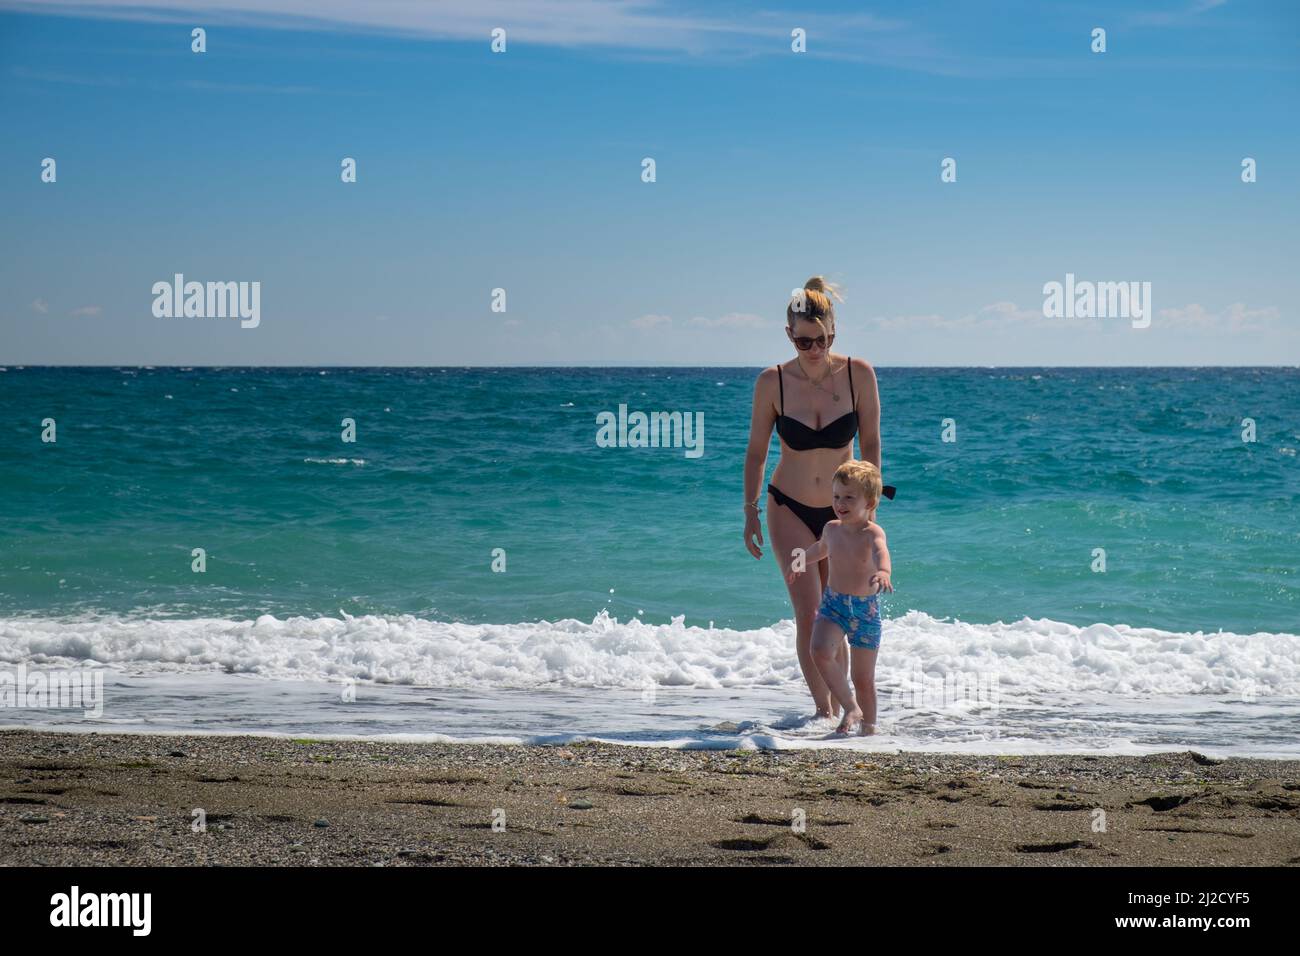 summer happy family of two years blonde baby with blue swimsuit walking in  water ocean holding hand with woman mother bikini in Stock Photo - Alamy